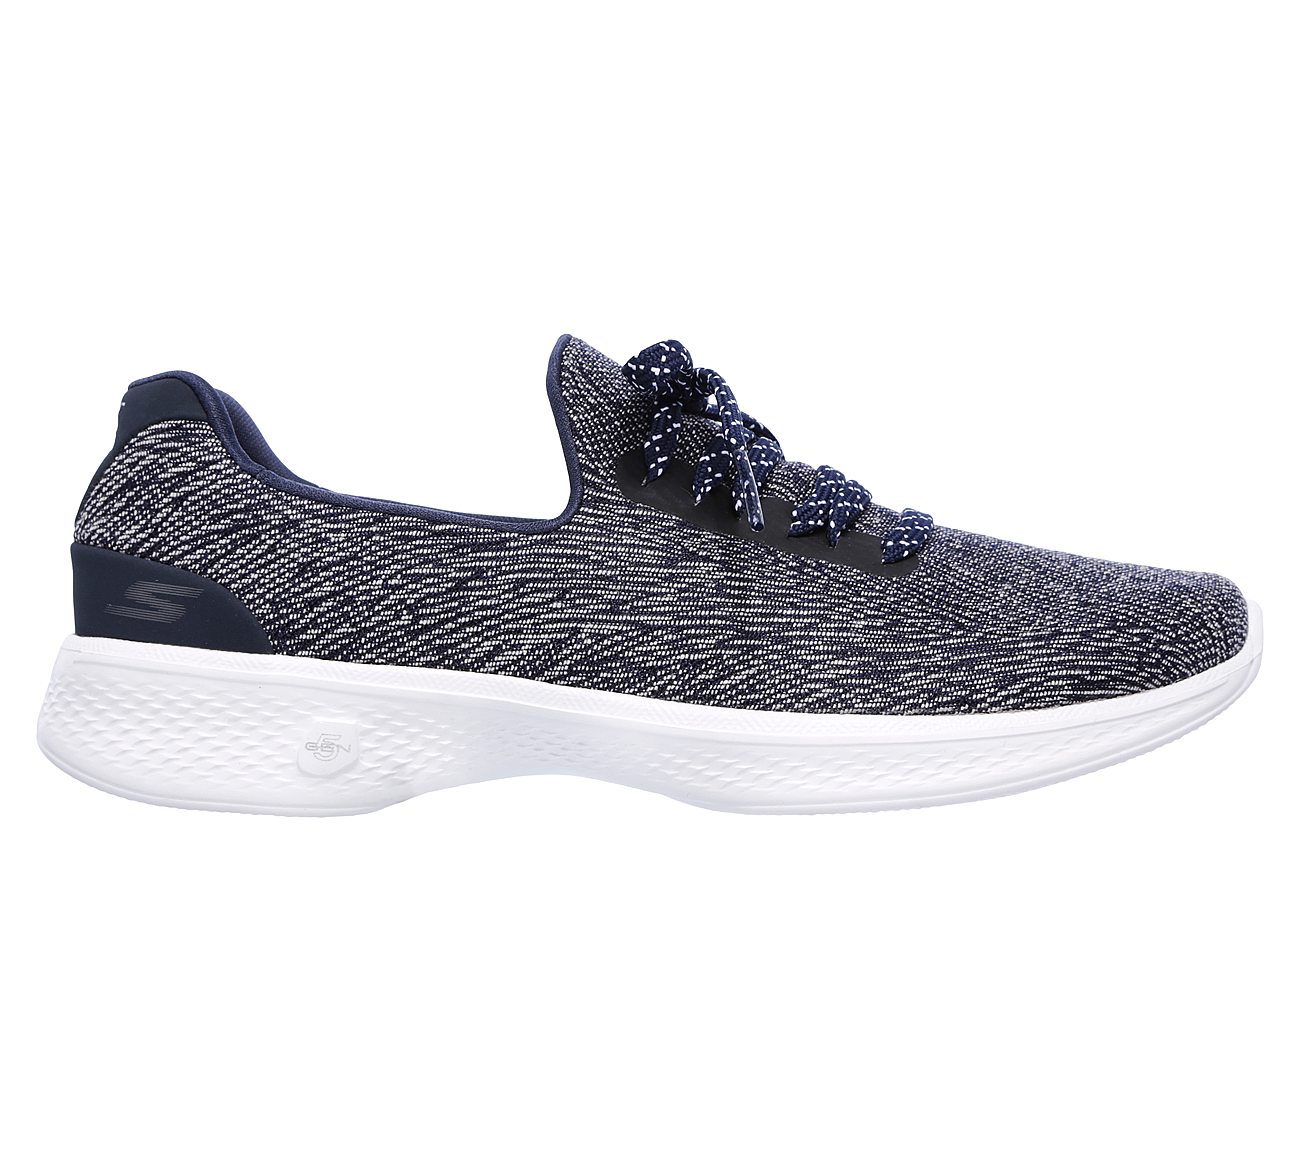 All Day Comfort Skechers Performance Shoes